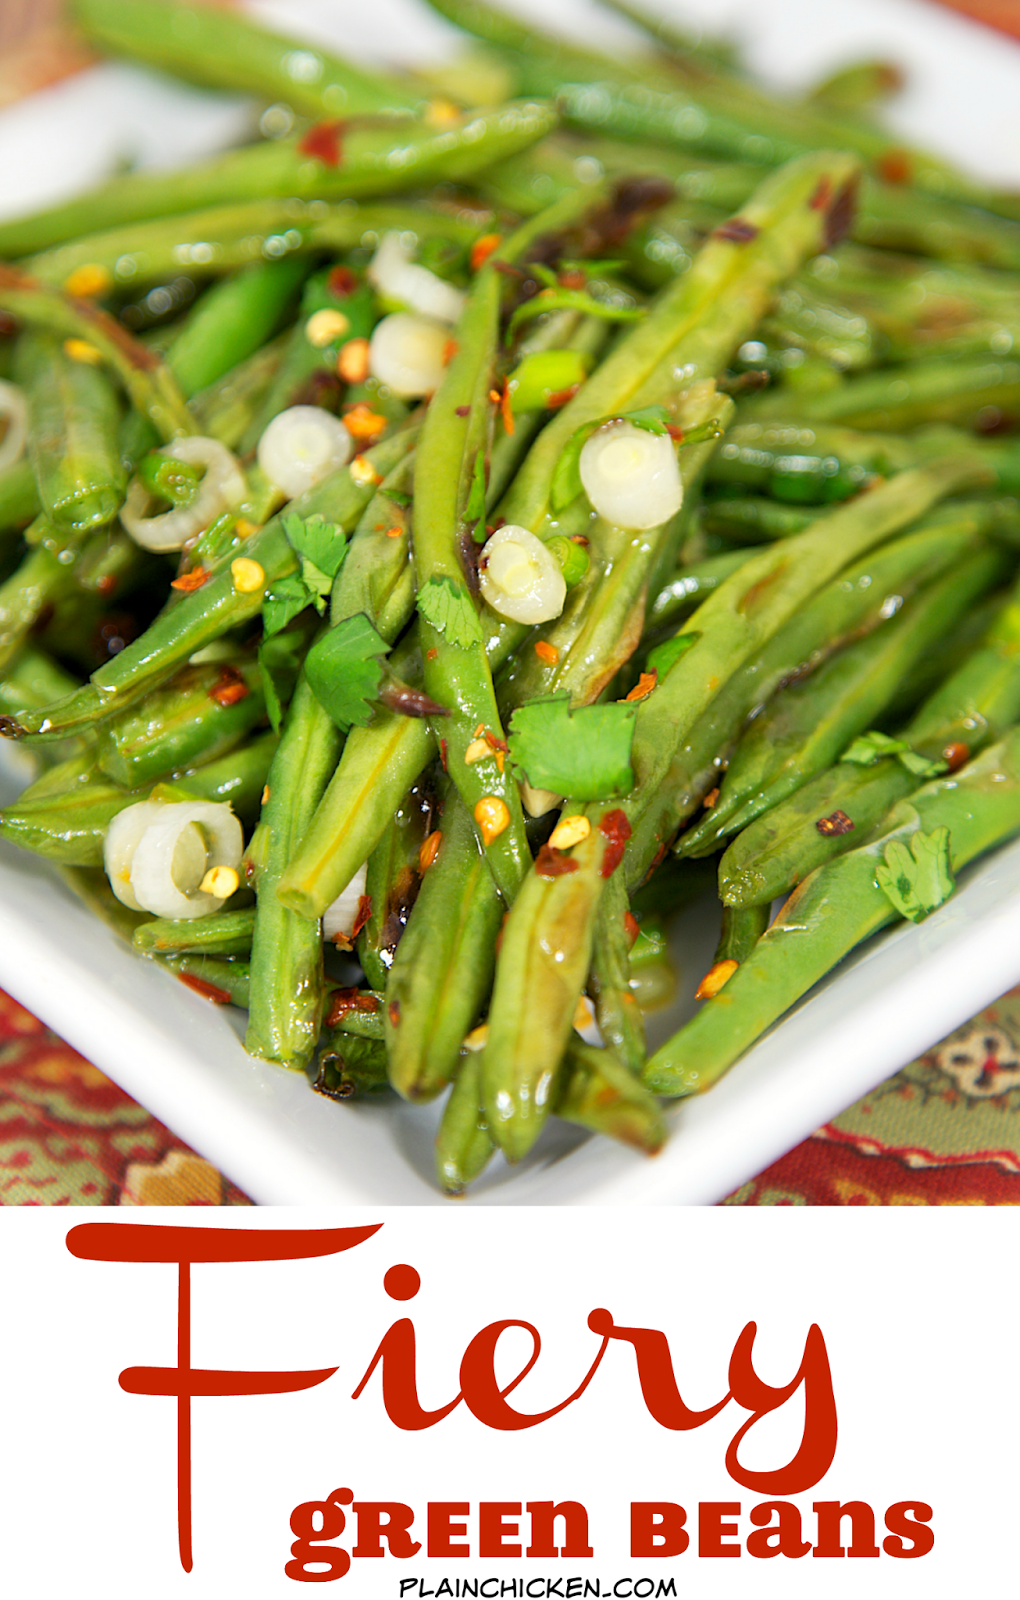 Fiery Green Beans - Ready in 15 minutes! Super easy weeknight side dish! Baked green beans tossed in lemon juice, cilantro, red pepper flakes and green onions. Tastes great warm or chilled. They actually taste better the longer they sit. SO good! Everyone gobbled these up!